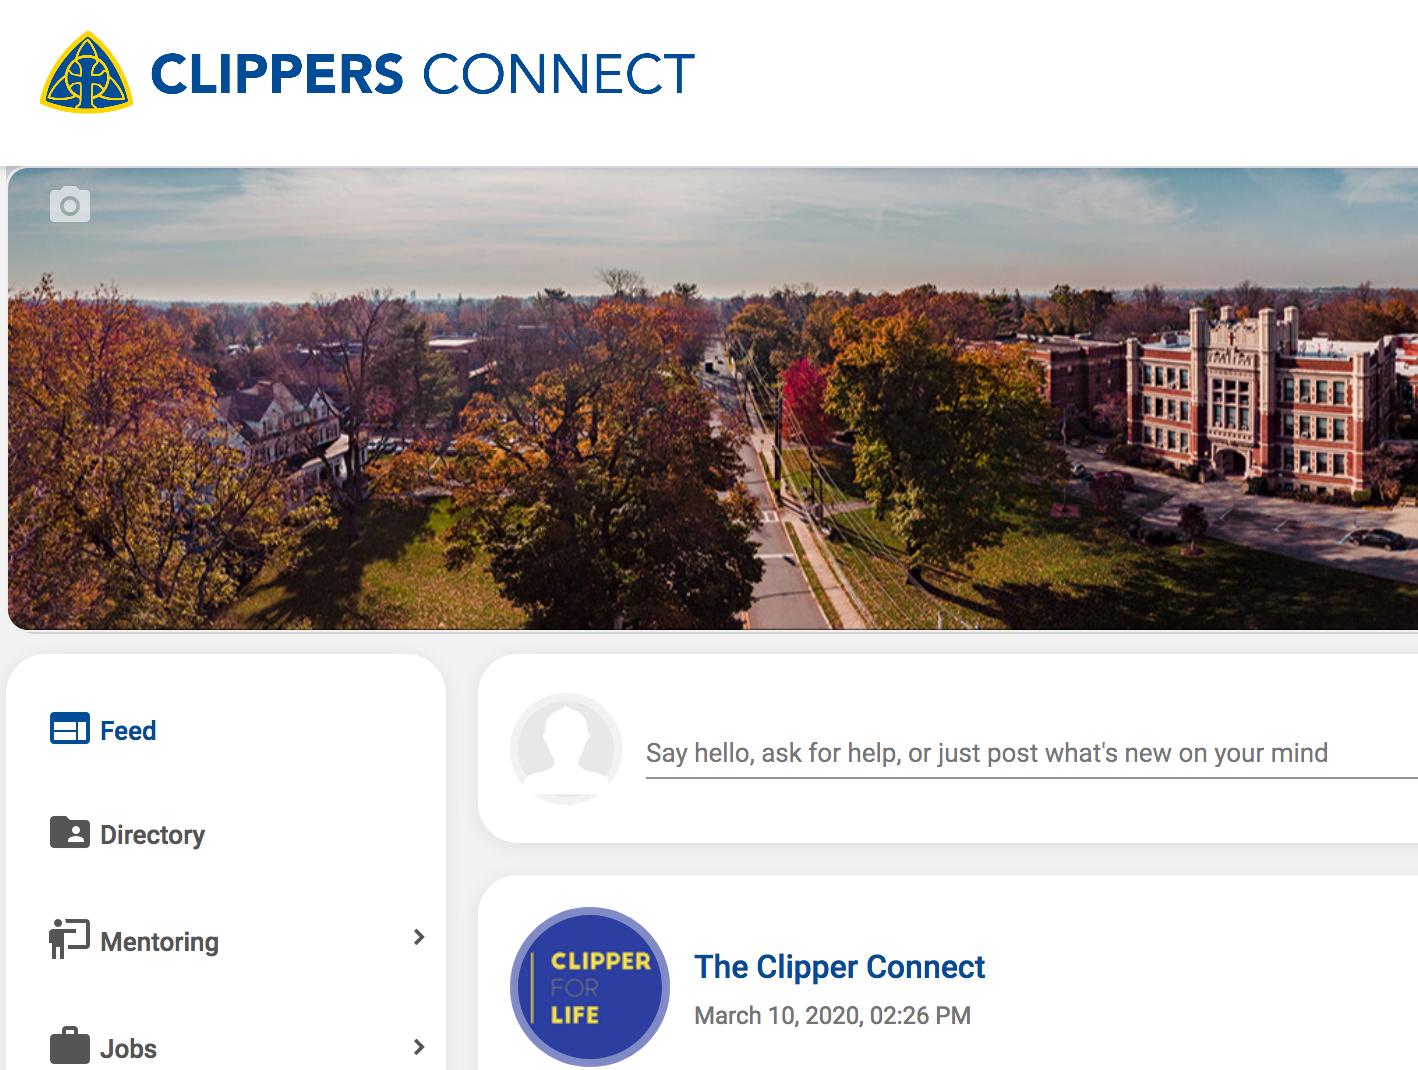 Clippers connect feed image